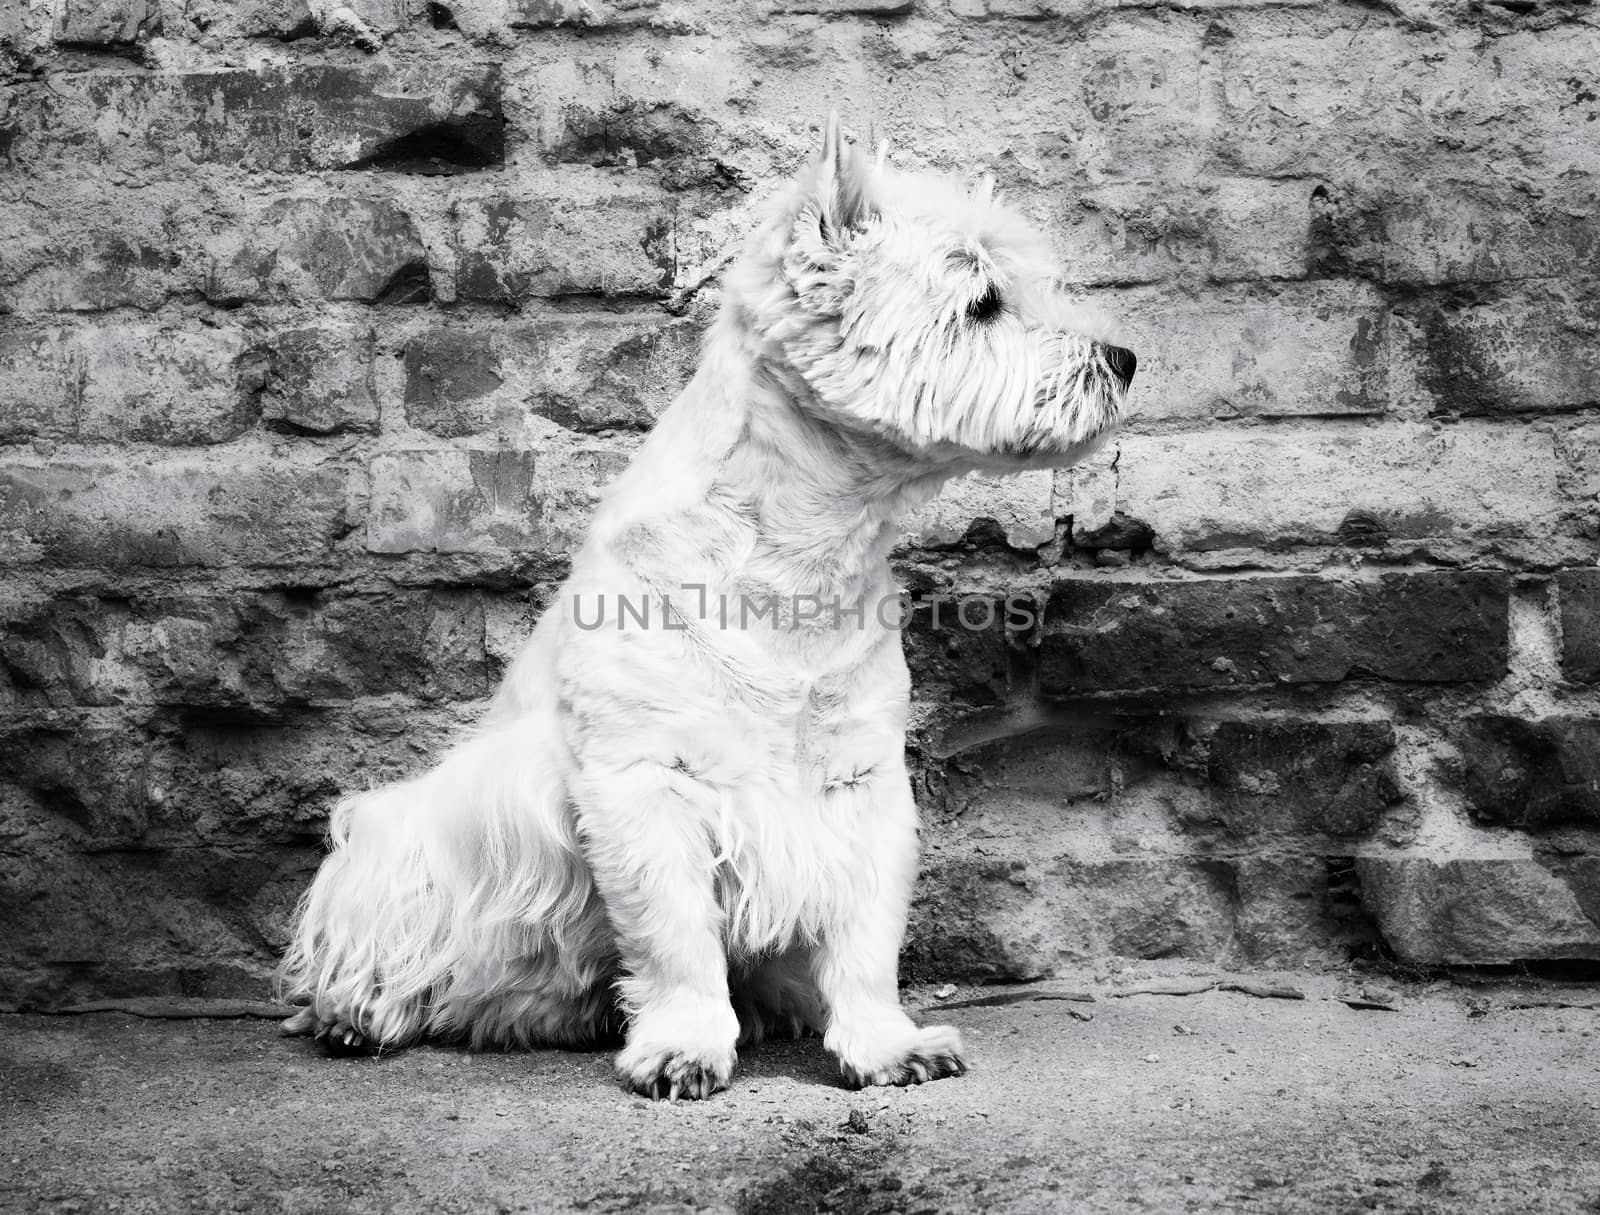 West Highland White Terrier sitting at the old brick wall. Nice contrast  of the dog hairs and contour of bricks.  The dog watches the surroundings